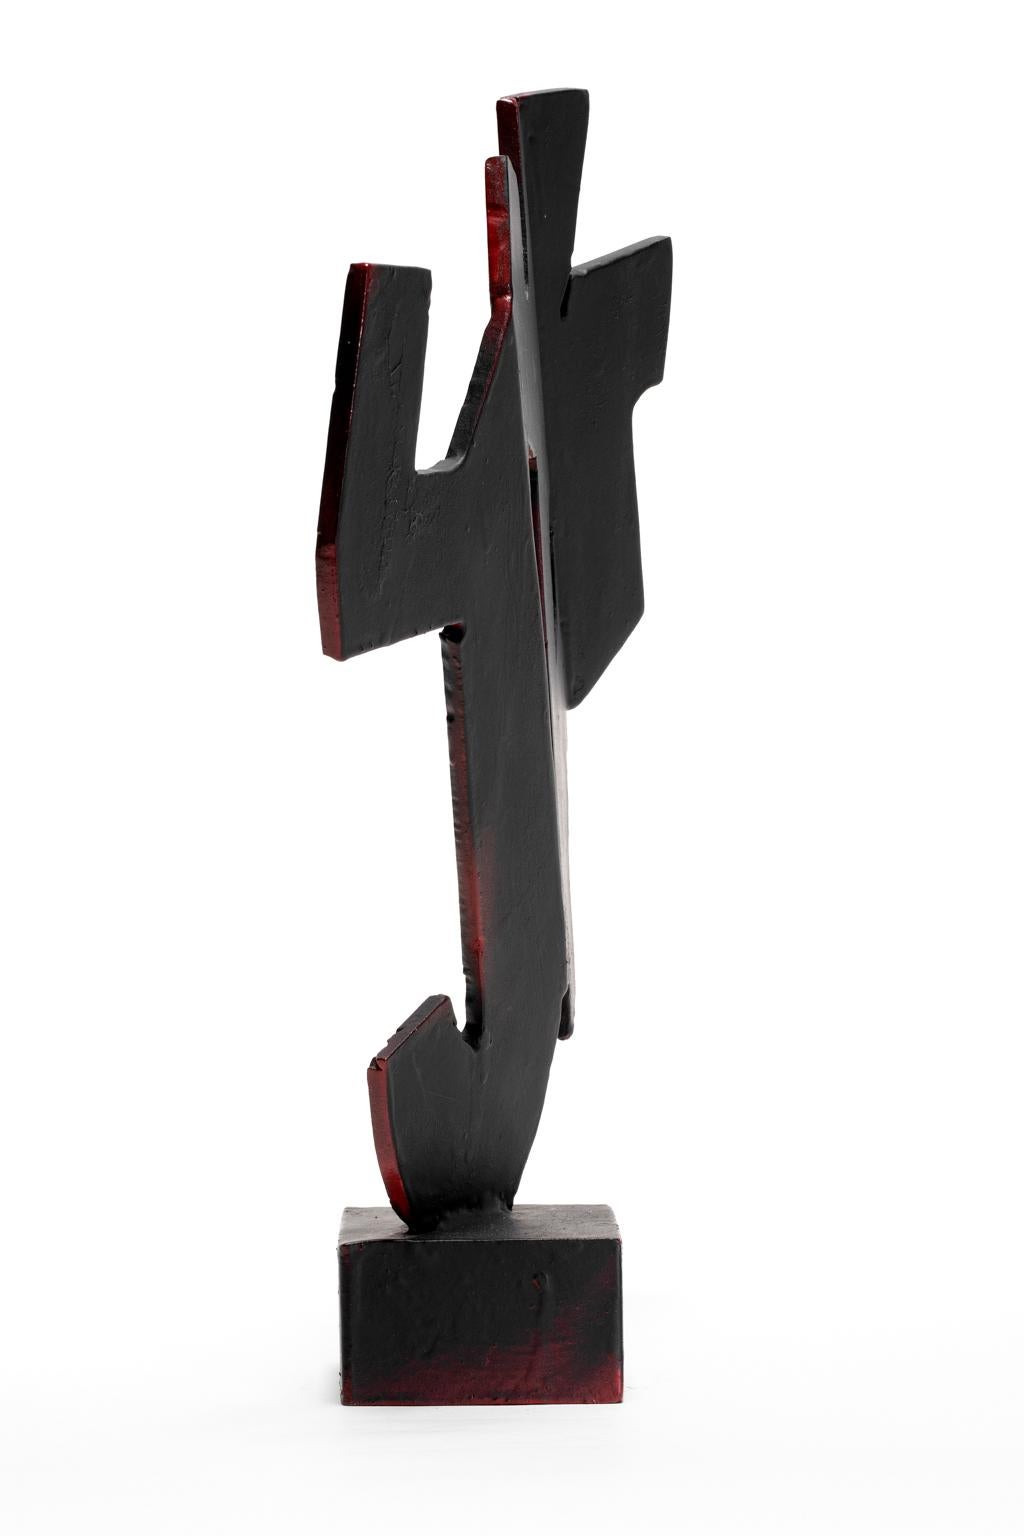 Welded Tony Rosenthal Abstract Sculpture Blackened Steel Red Blushes For Sale